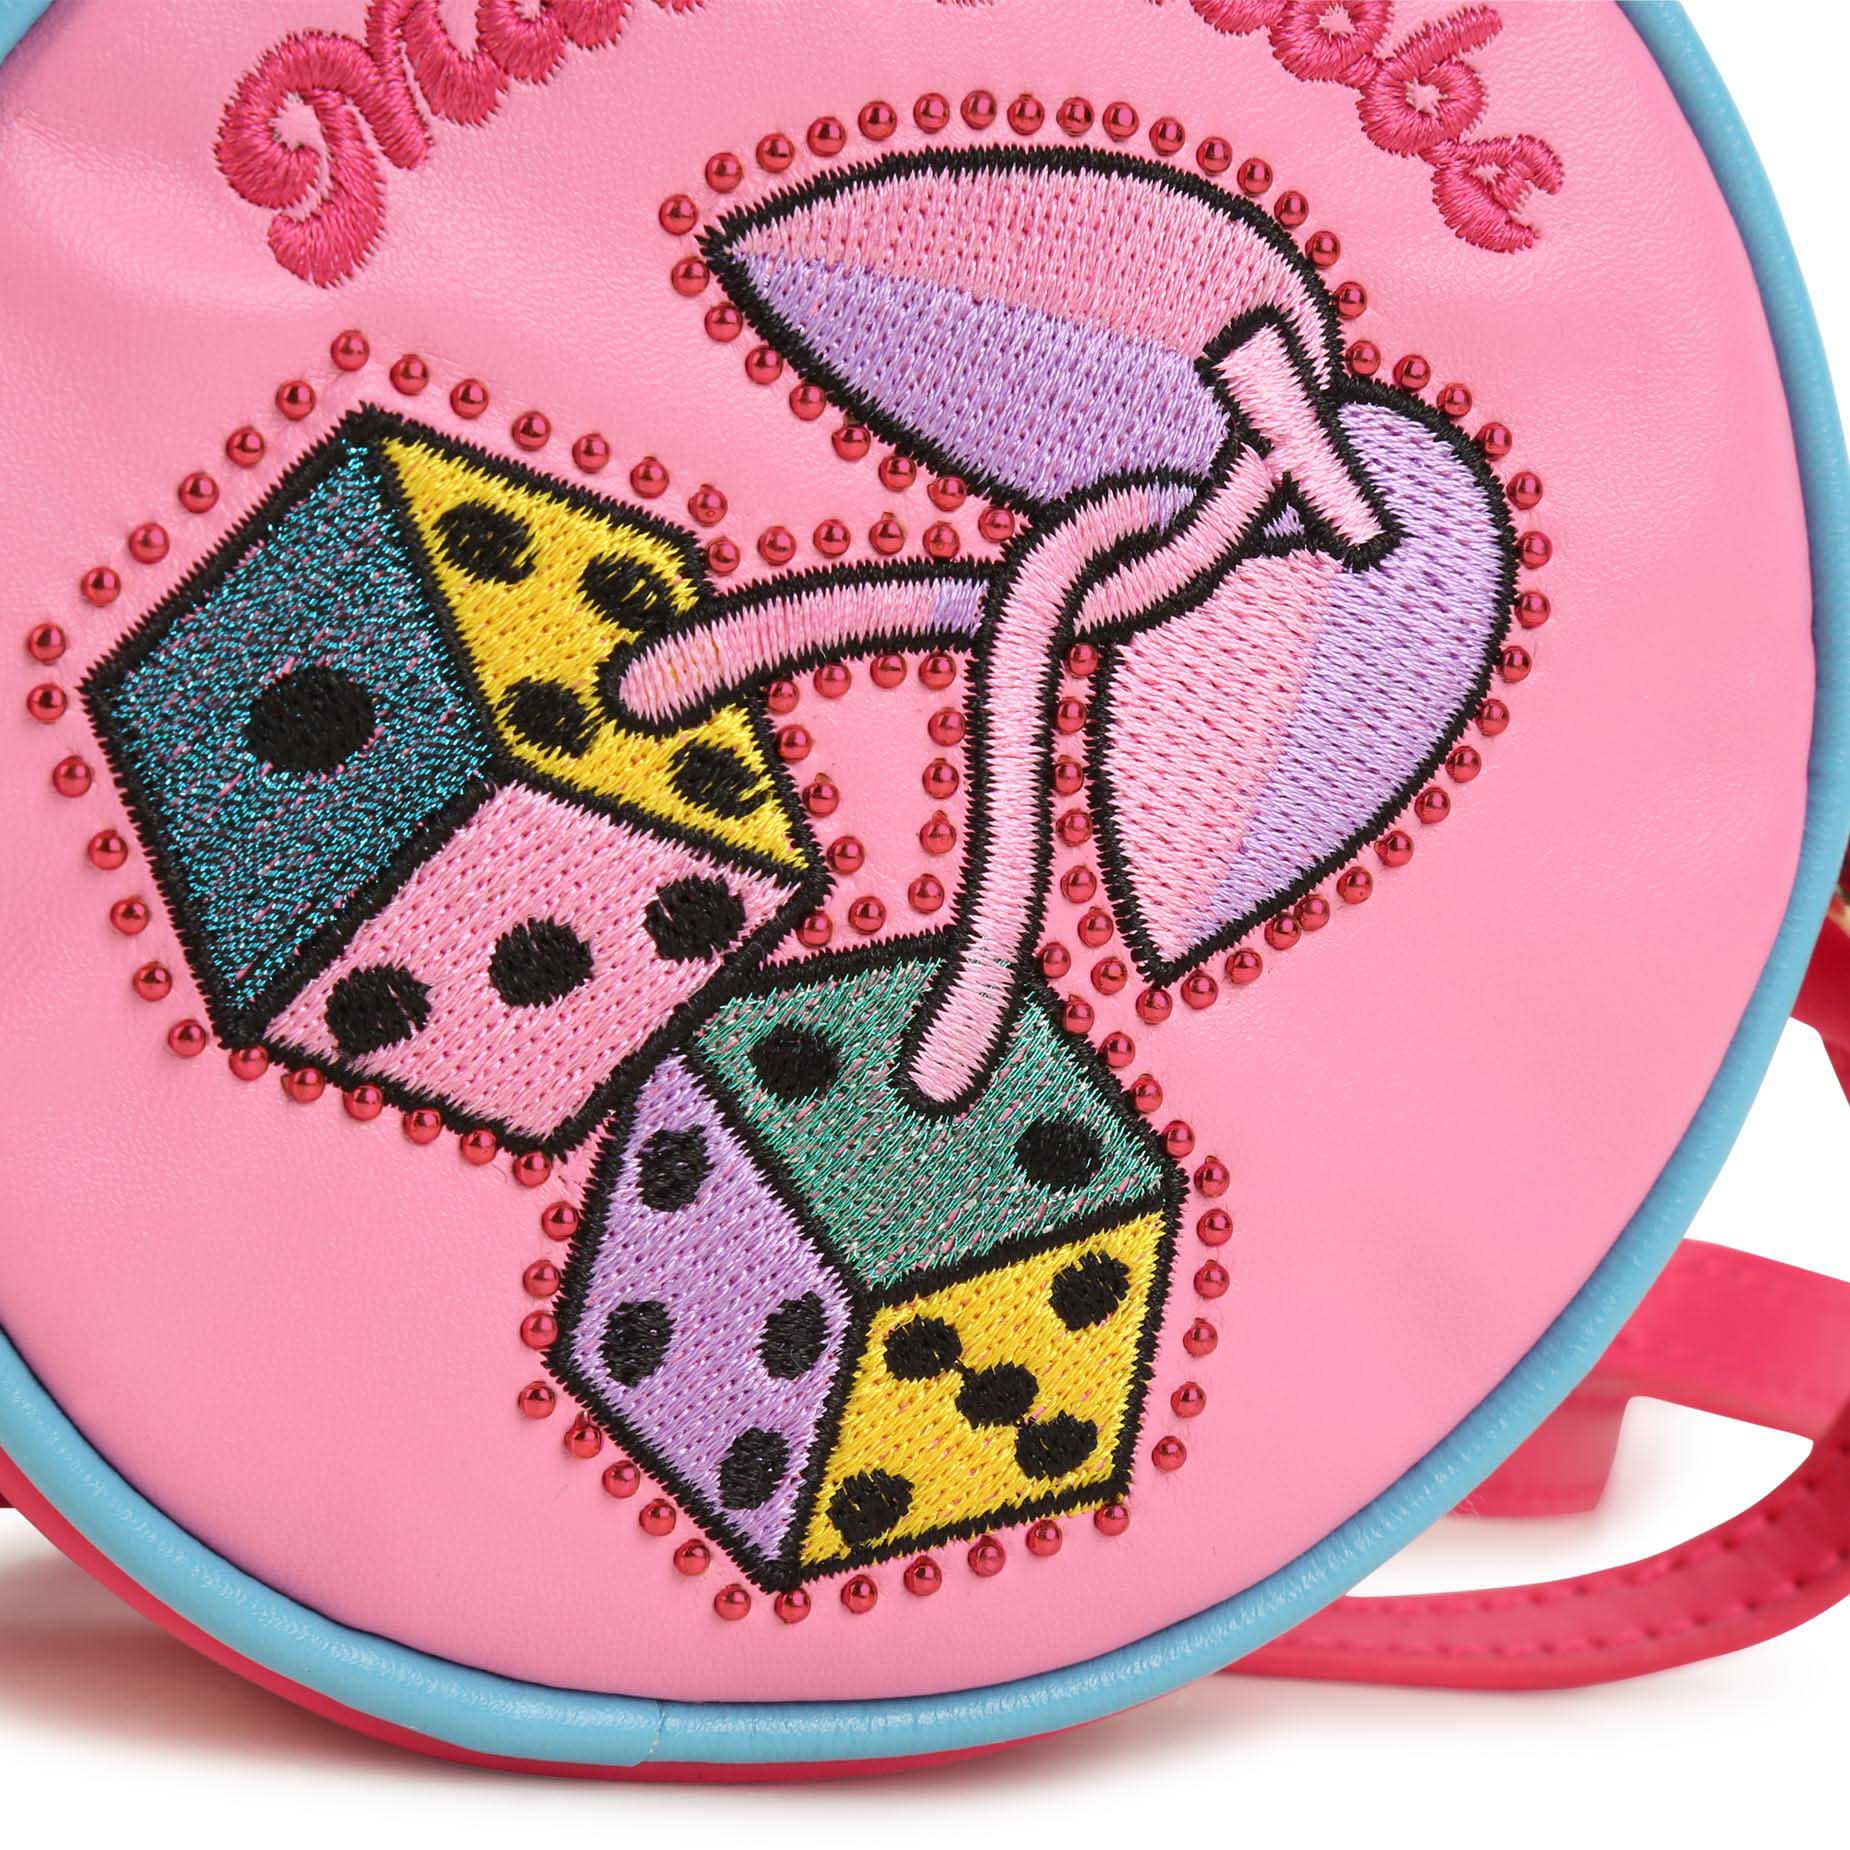 Round embroidered bag MARC JACOBS for GIRL